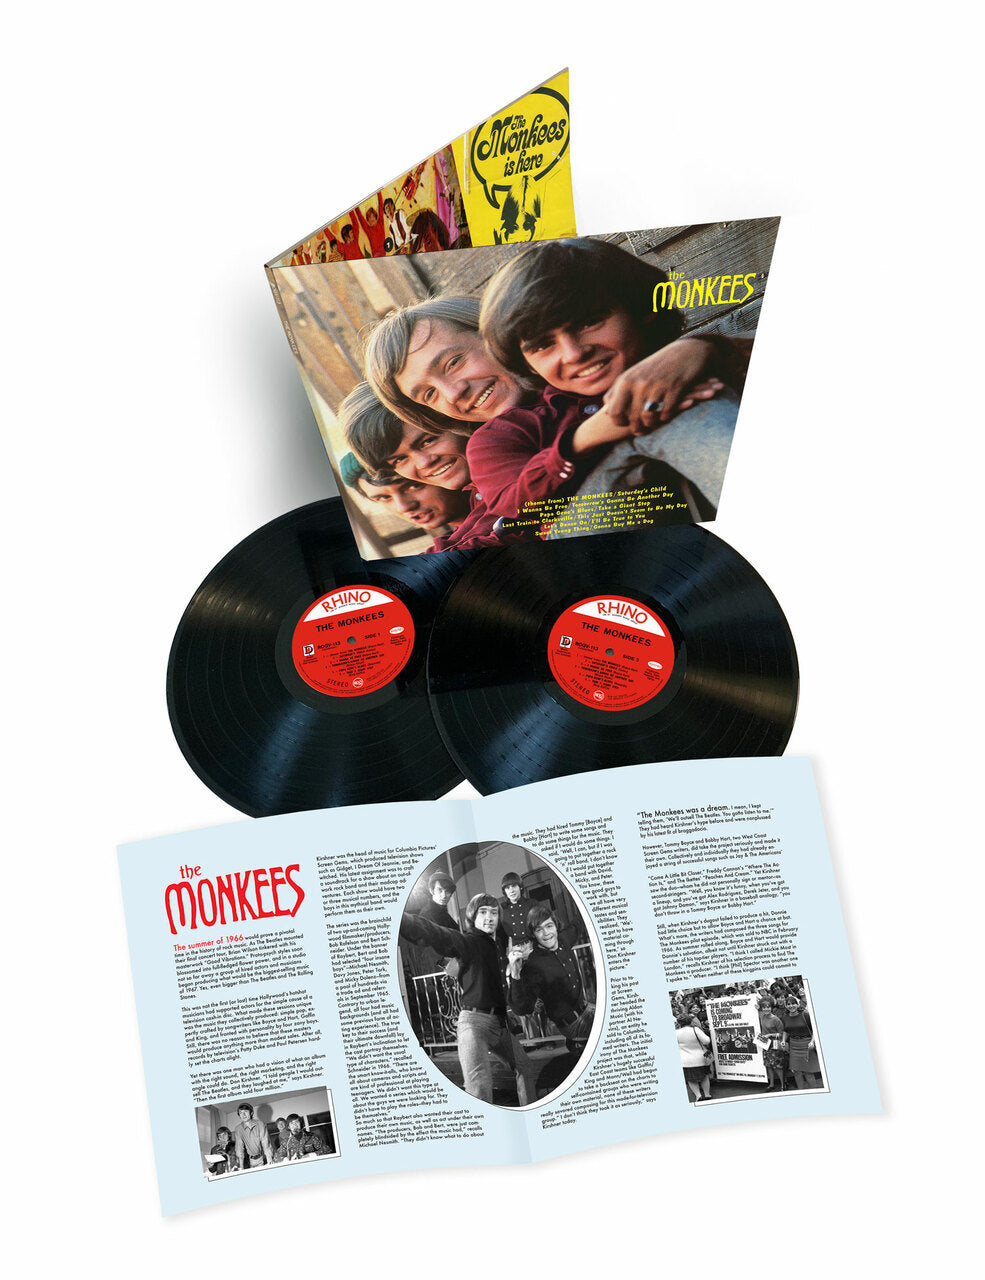 Buy The Monkees - The Monkees (Deluxe Limited Edition, 2xLP 180 Gram Vinyl)